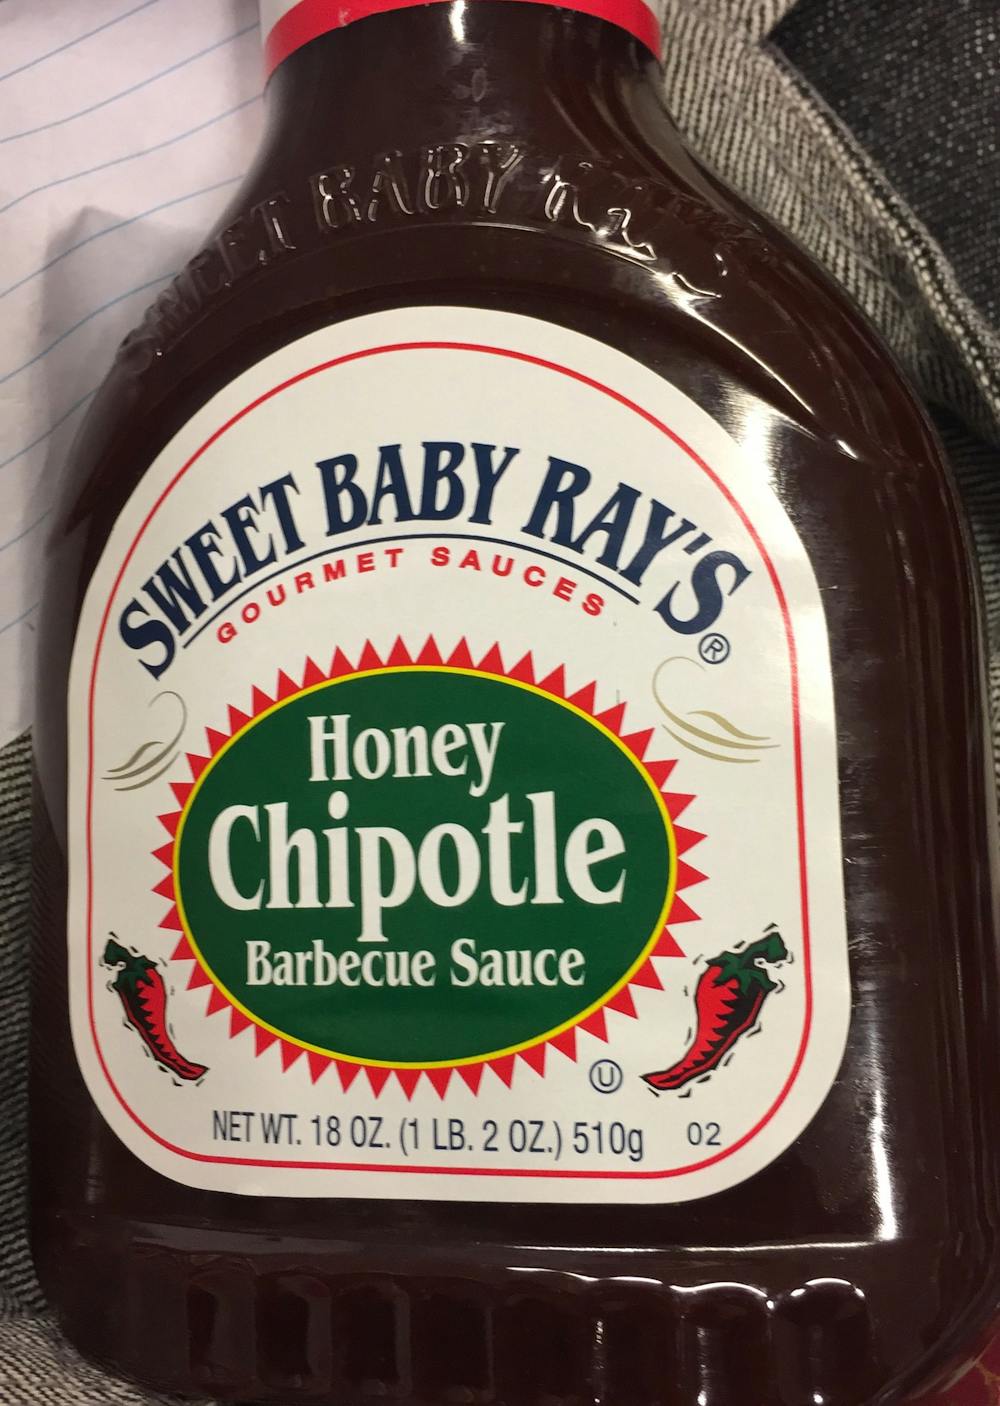 Honey chipotle barbecue sauce, Sweet baby ray's